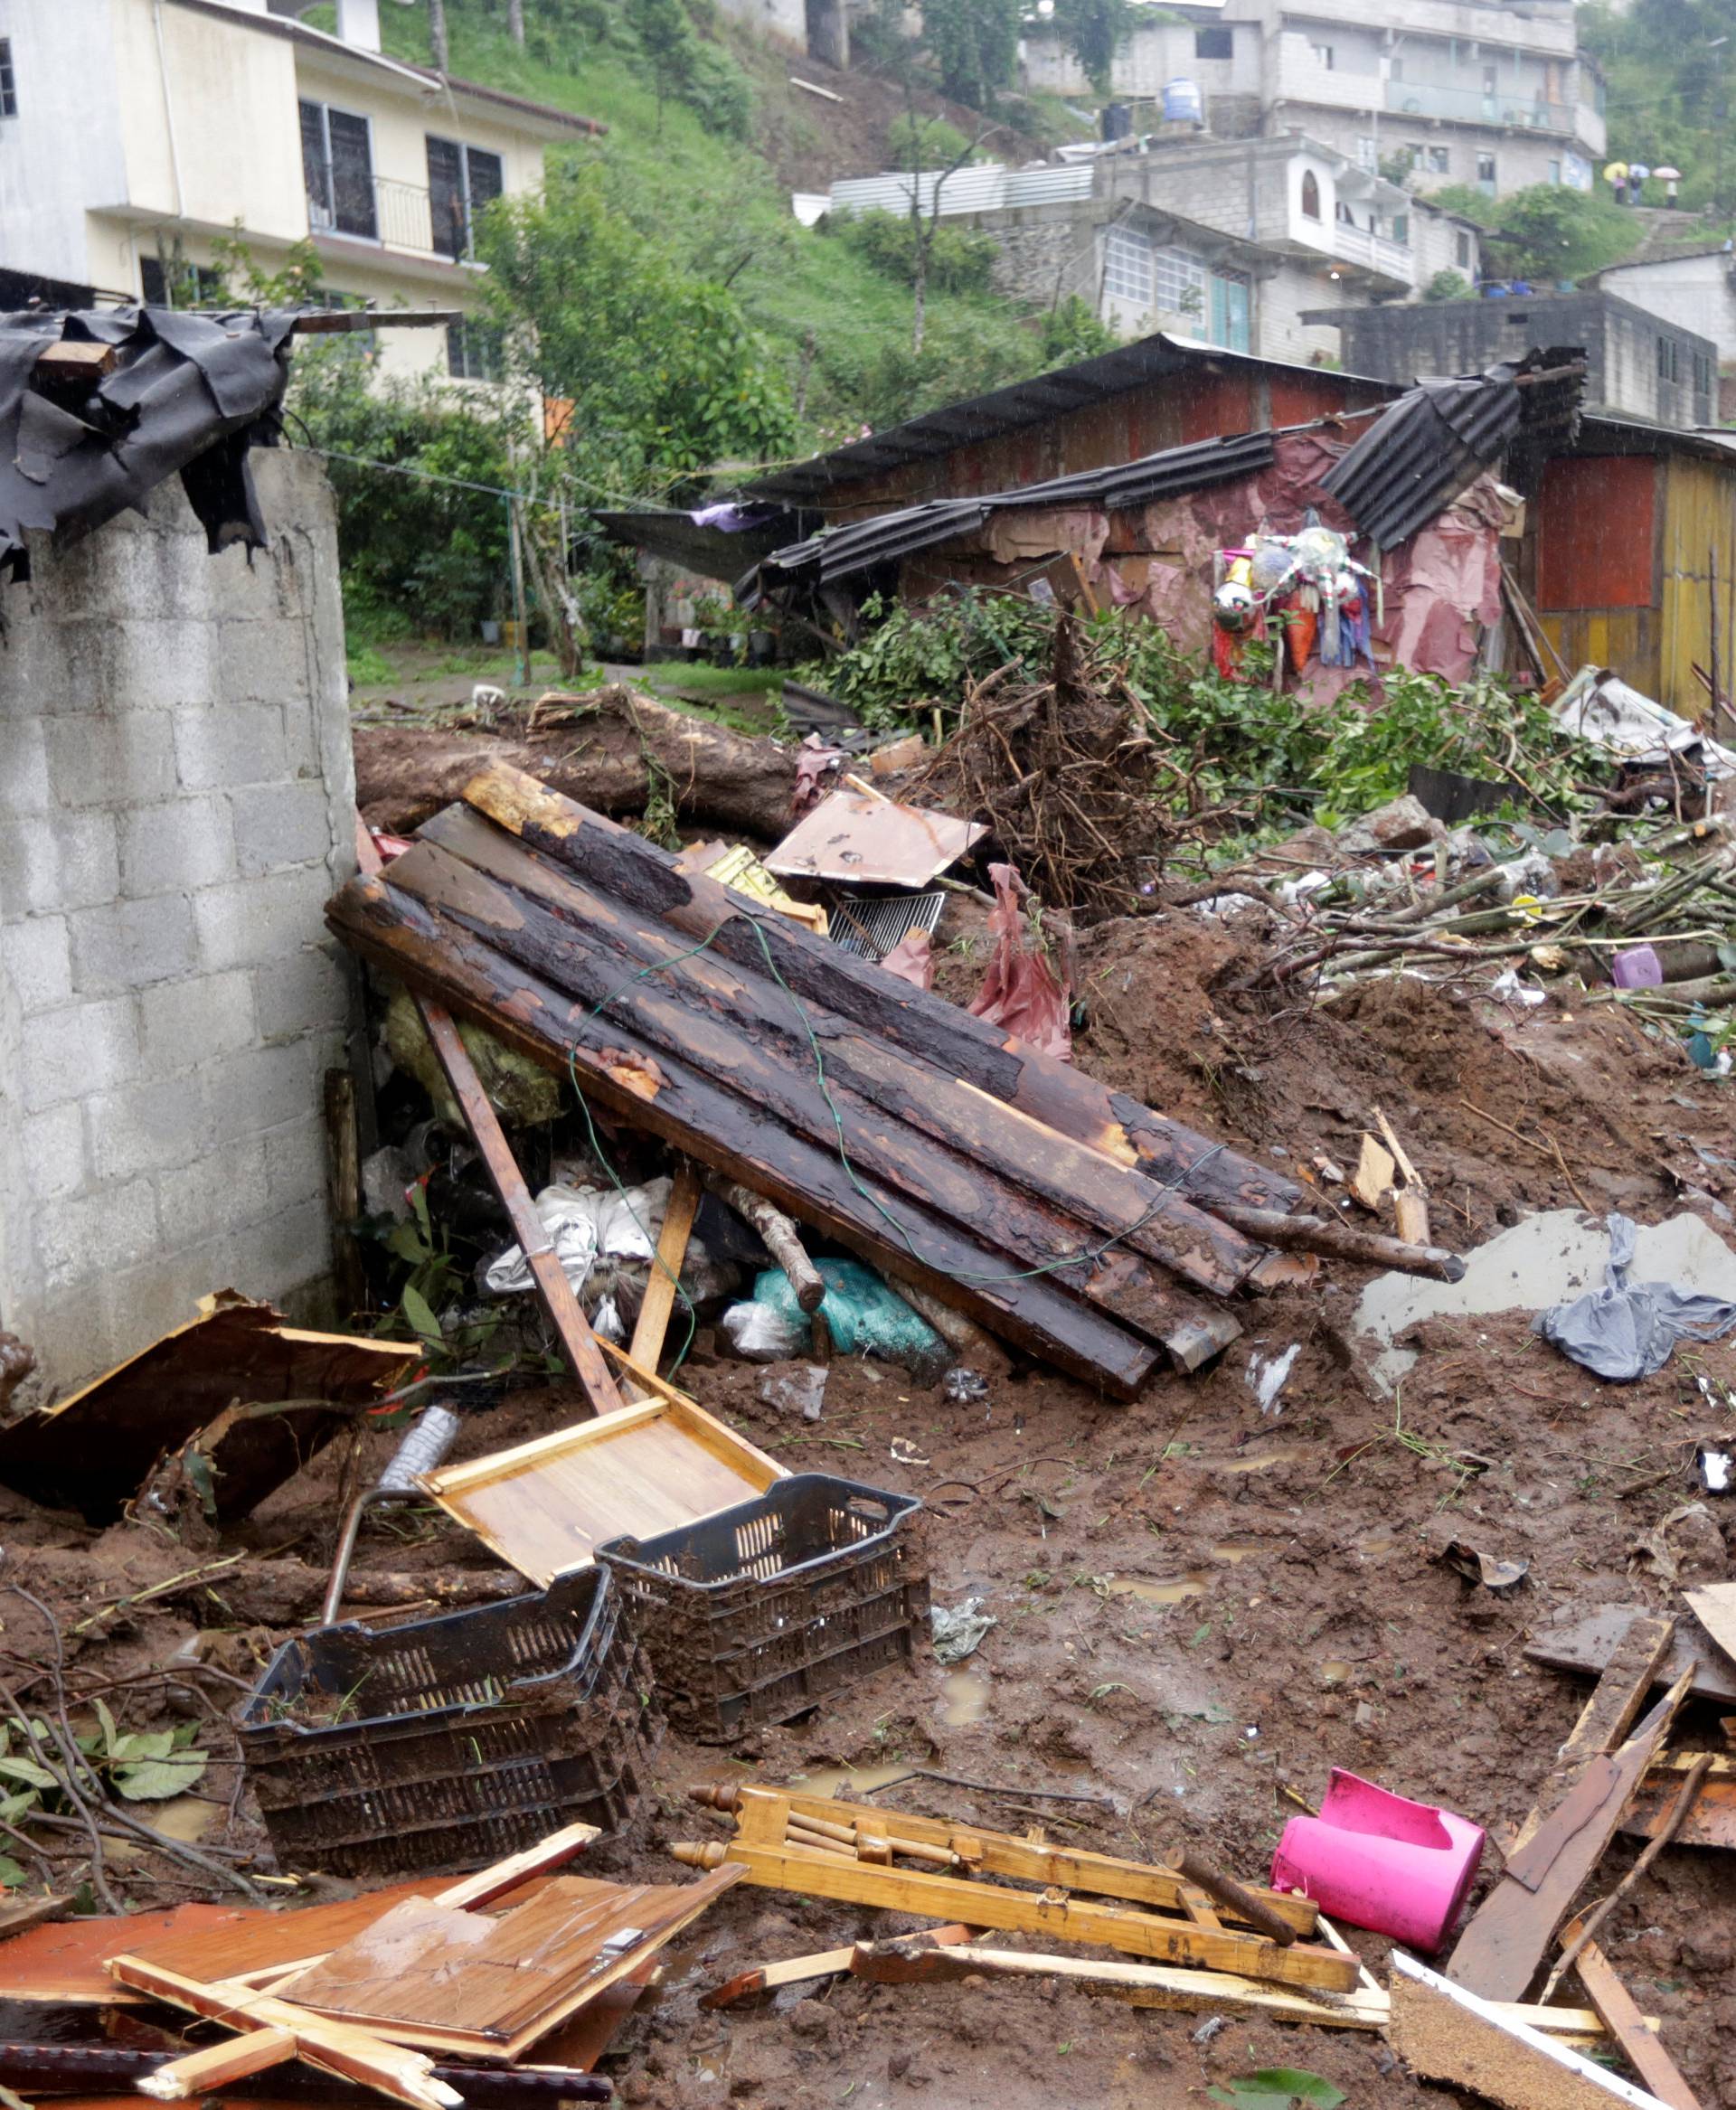 Damaged houses and debris are seen after a mudslide following heavy showers caused by the passing of Tropical Storm Earl, in the town of Huauchinango